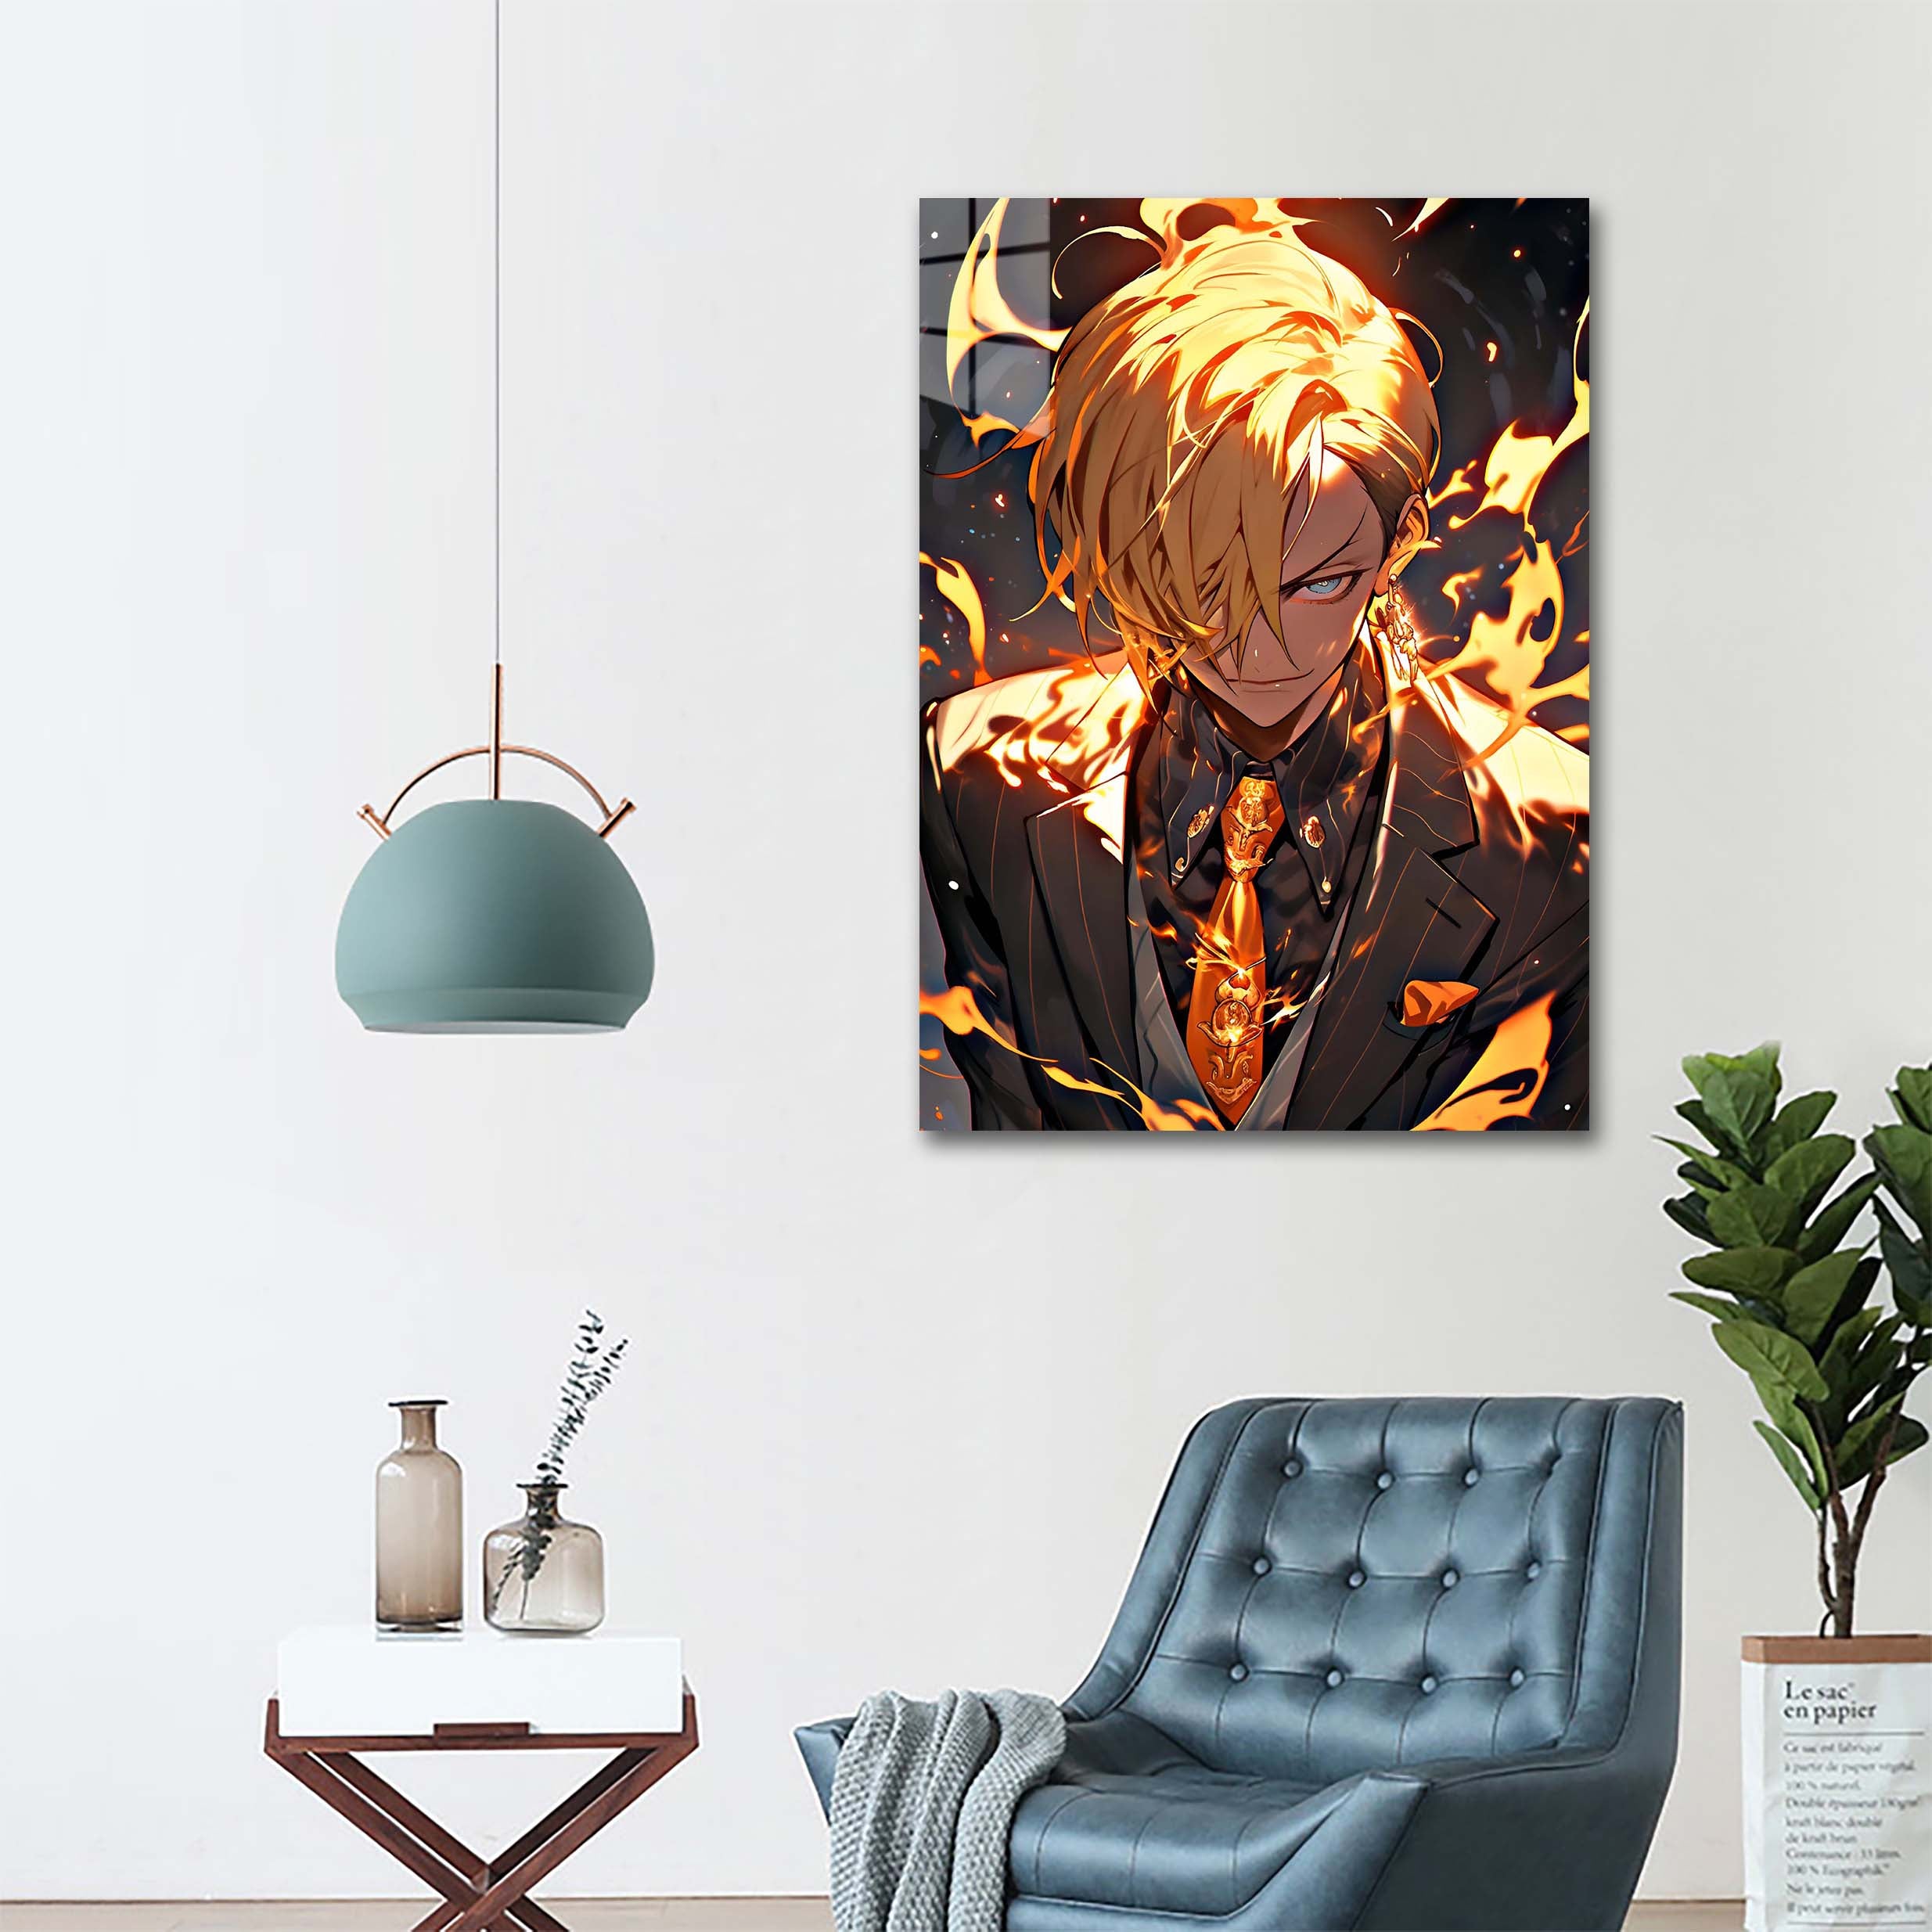 Sanji from One piece -designed by @Vid_M@tion